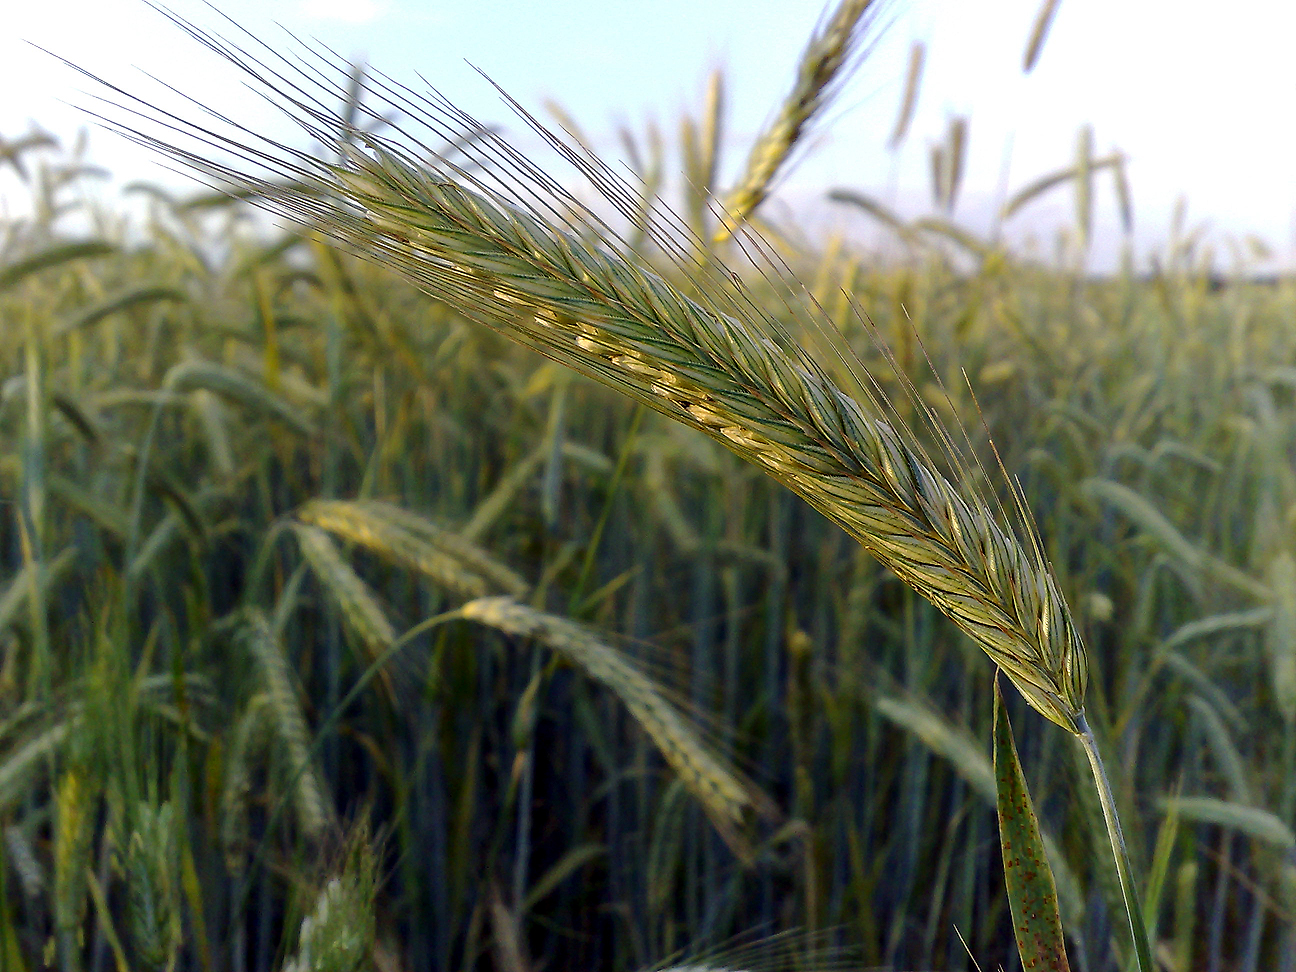 Photograph showing a close-up of an ear of rye on a plant growing in a field.